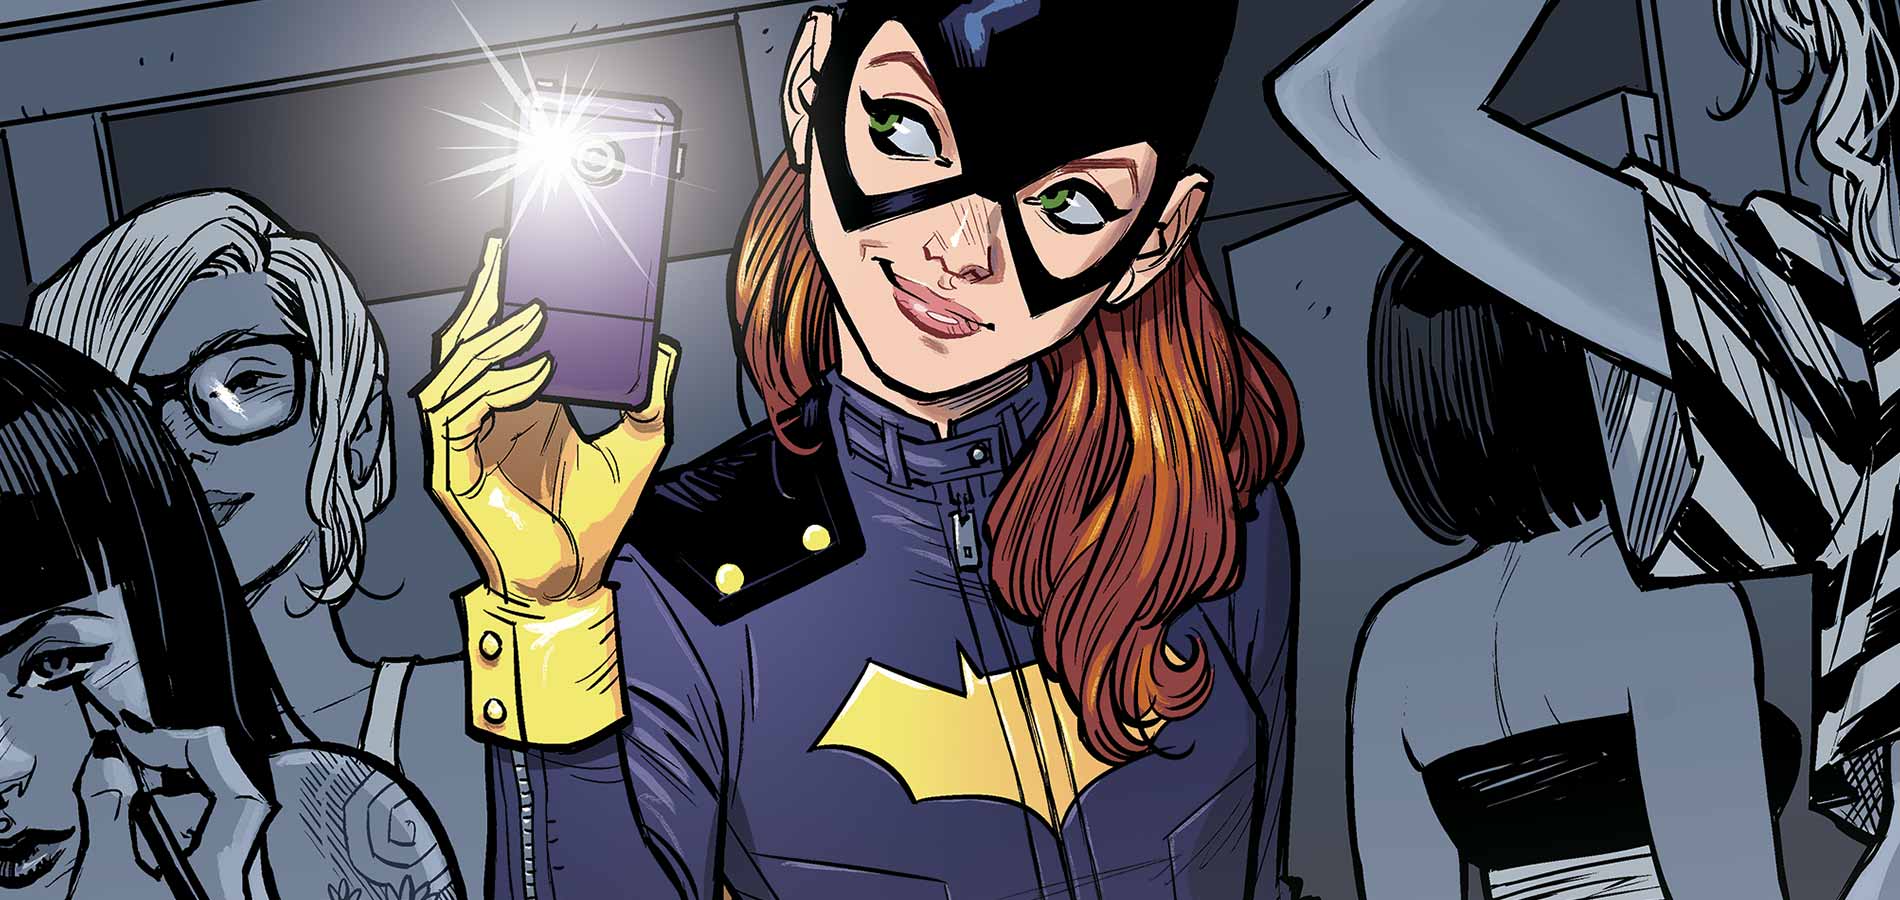 Joss Whedon exits Batgirl movie after admitting "I really didn't have a story"